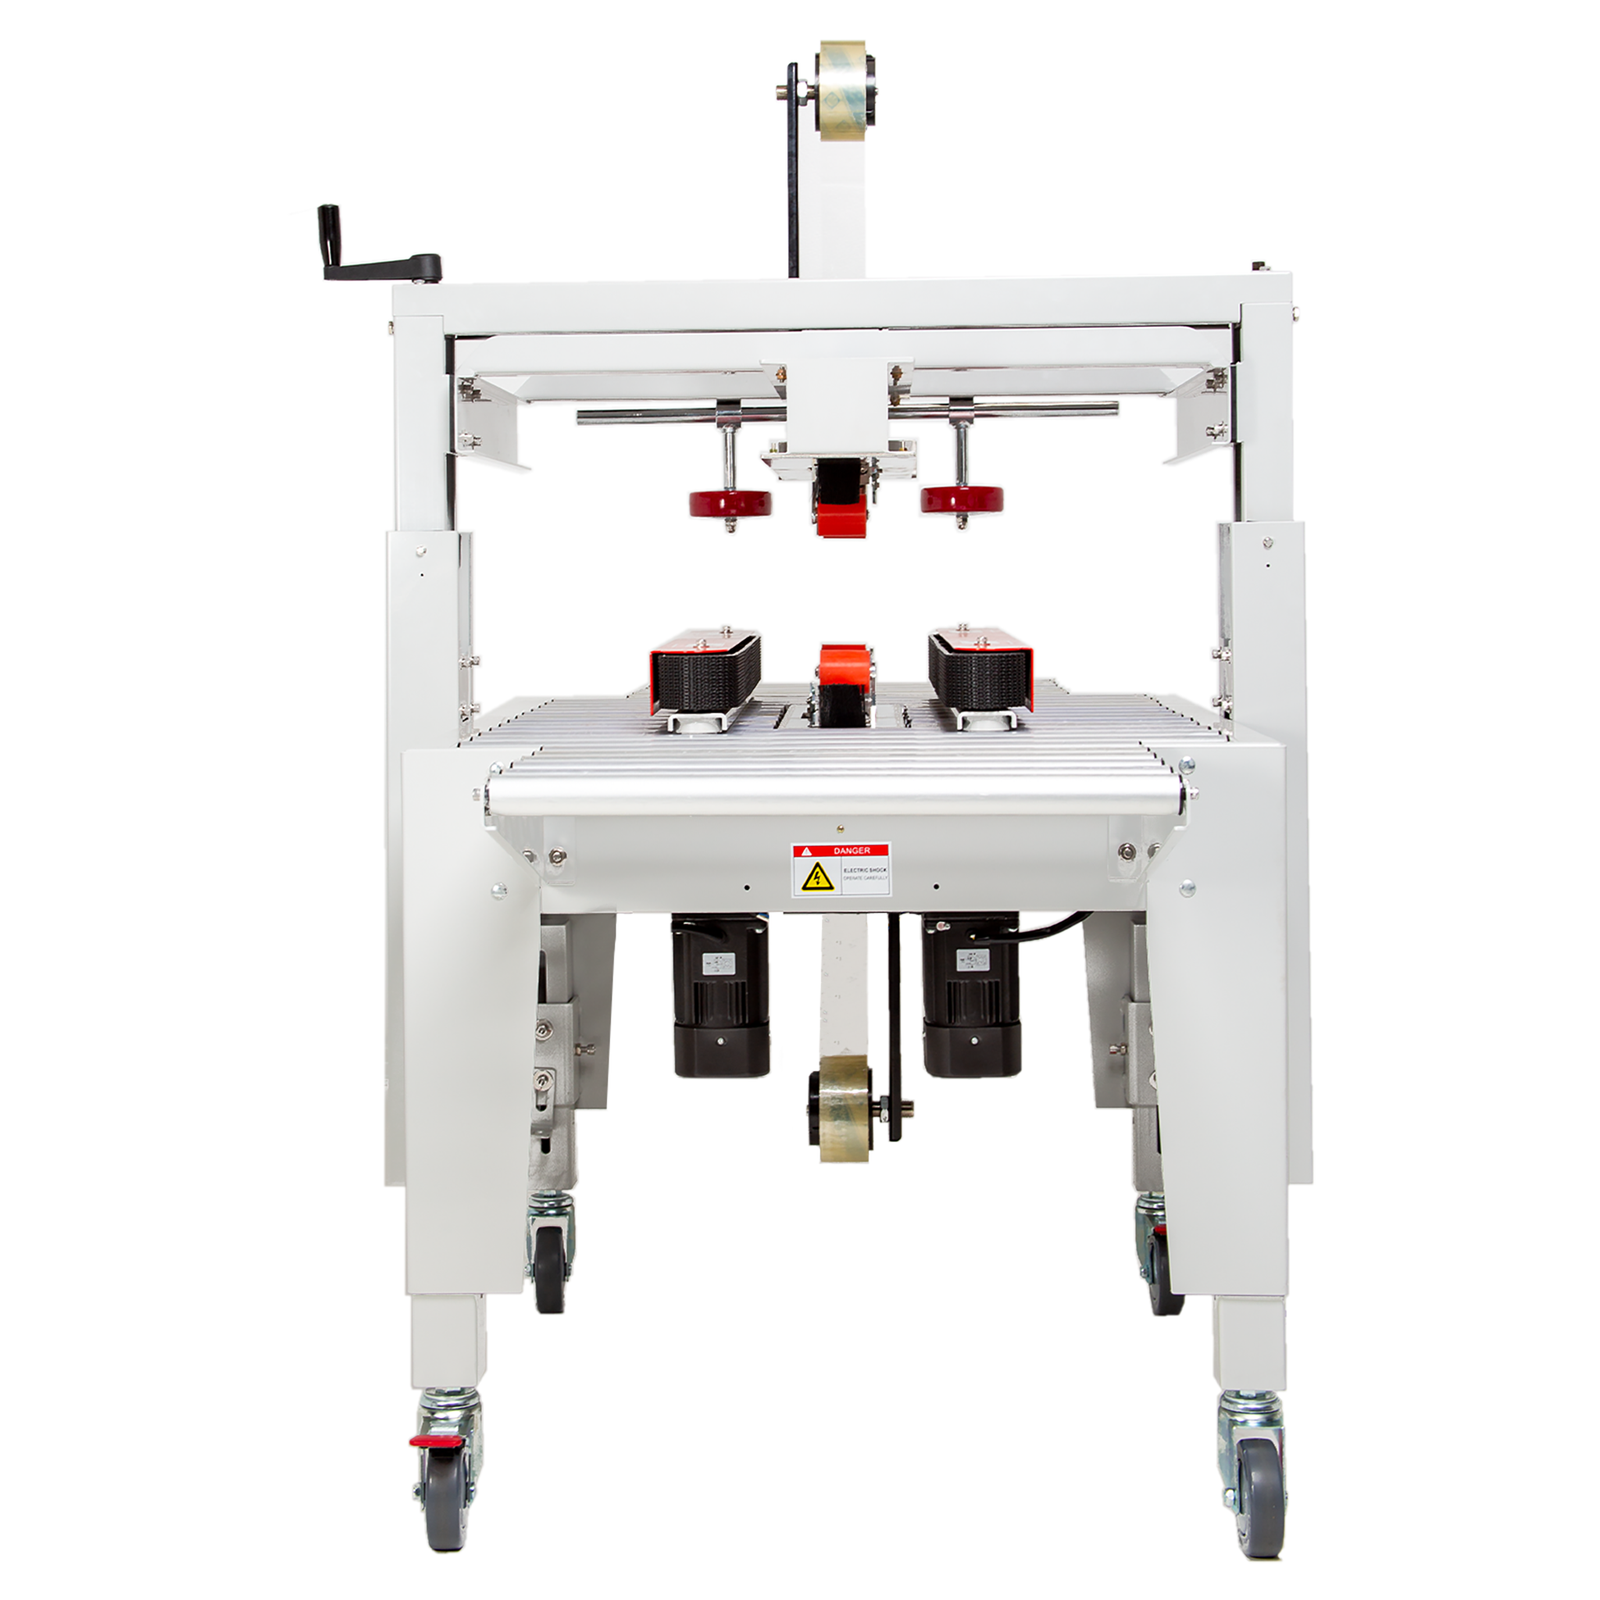 side view of the case sealer machine with rolls of clear self adhesive tape on top and bottom, side traction bars and casters